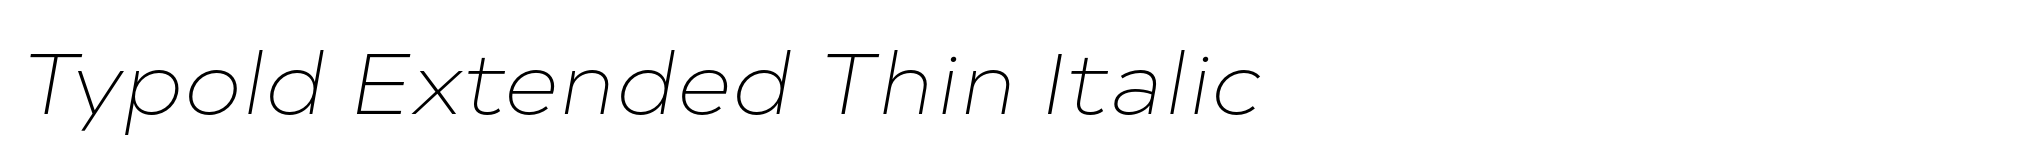 Typold Extended Thin Italic image